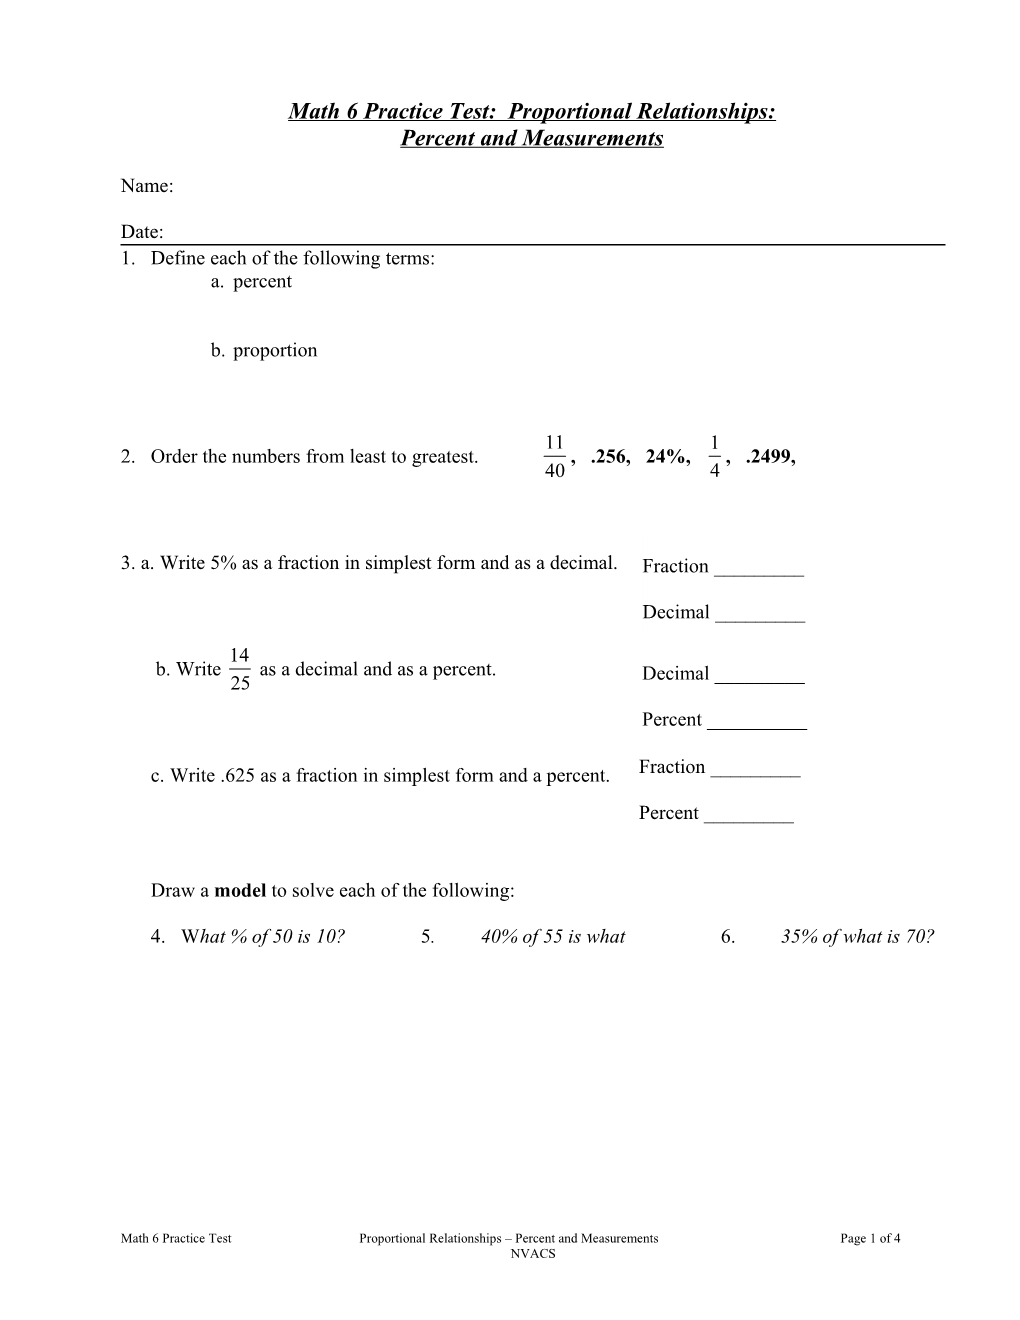 Math 6 Practice Test: Proportional Relationships